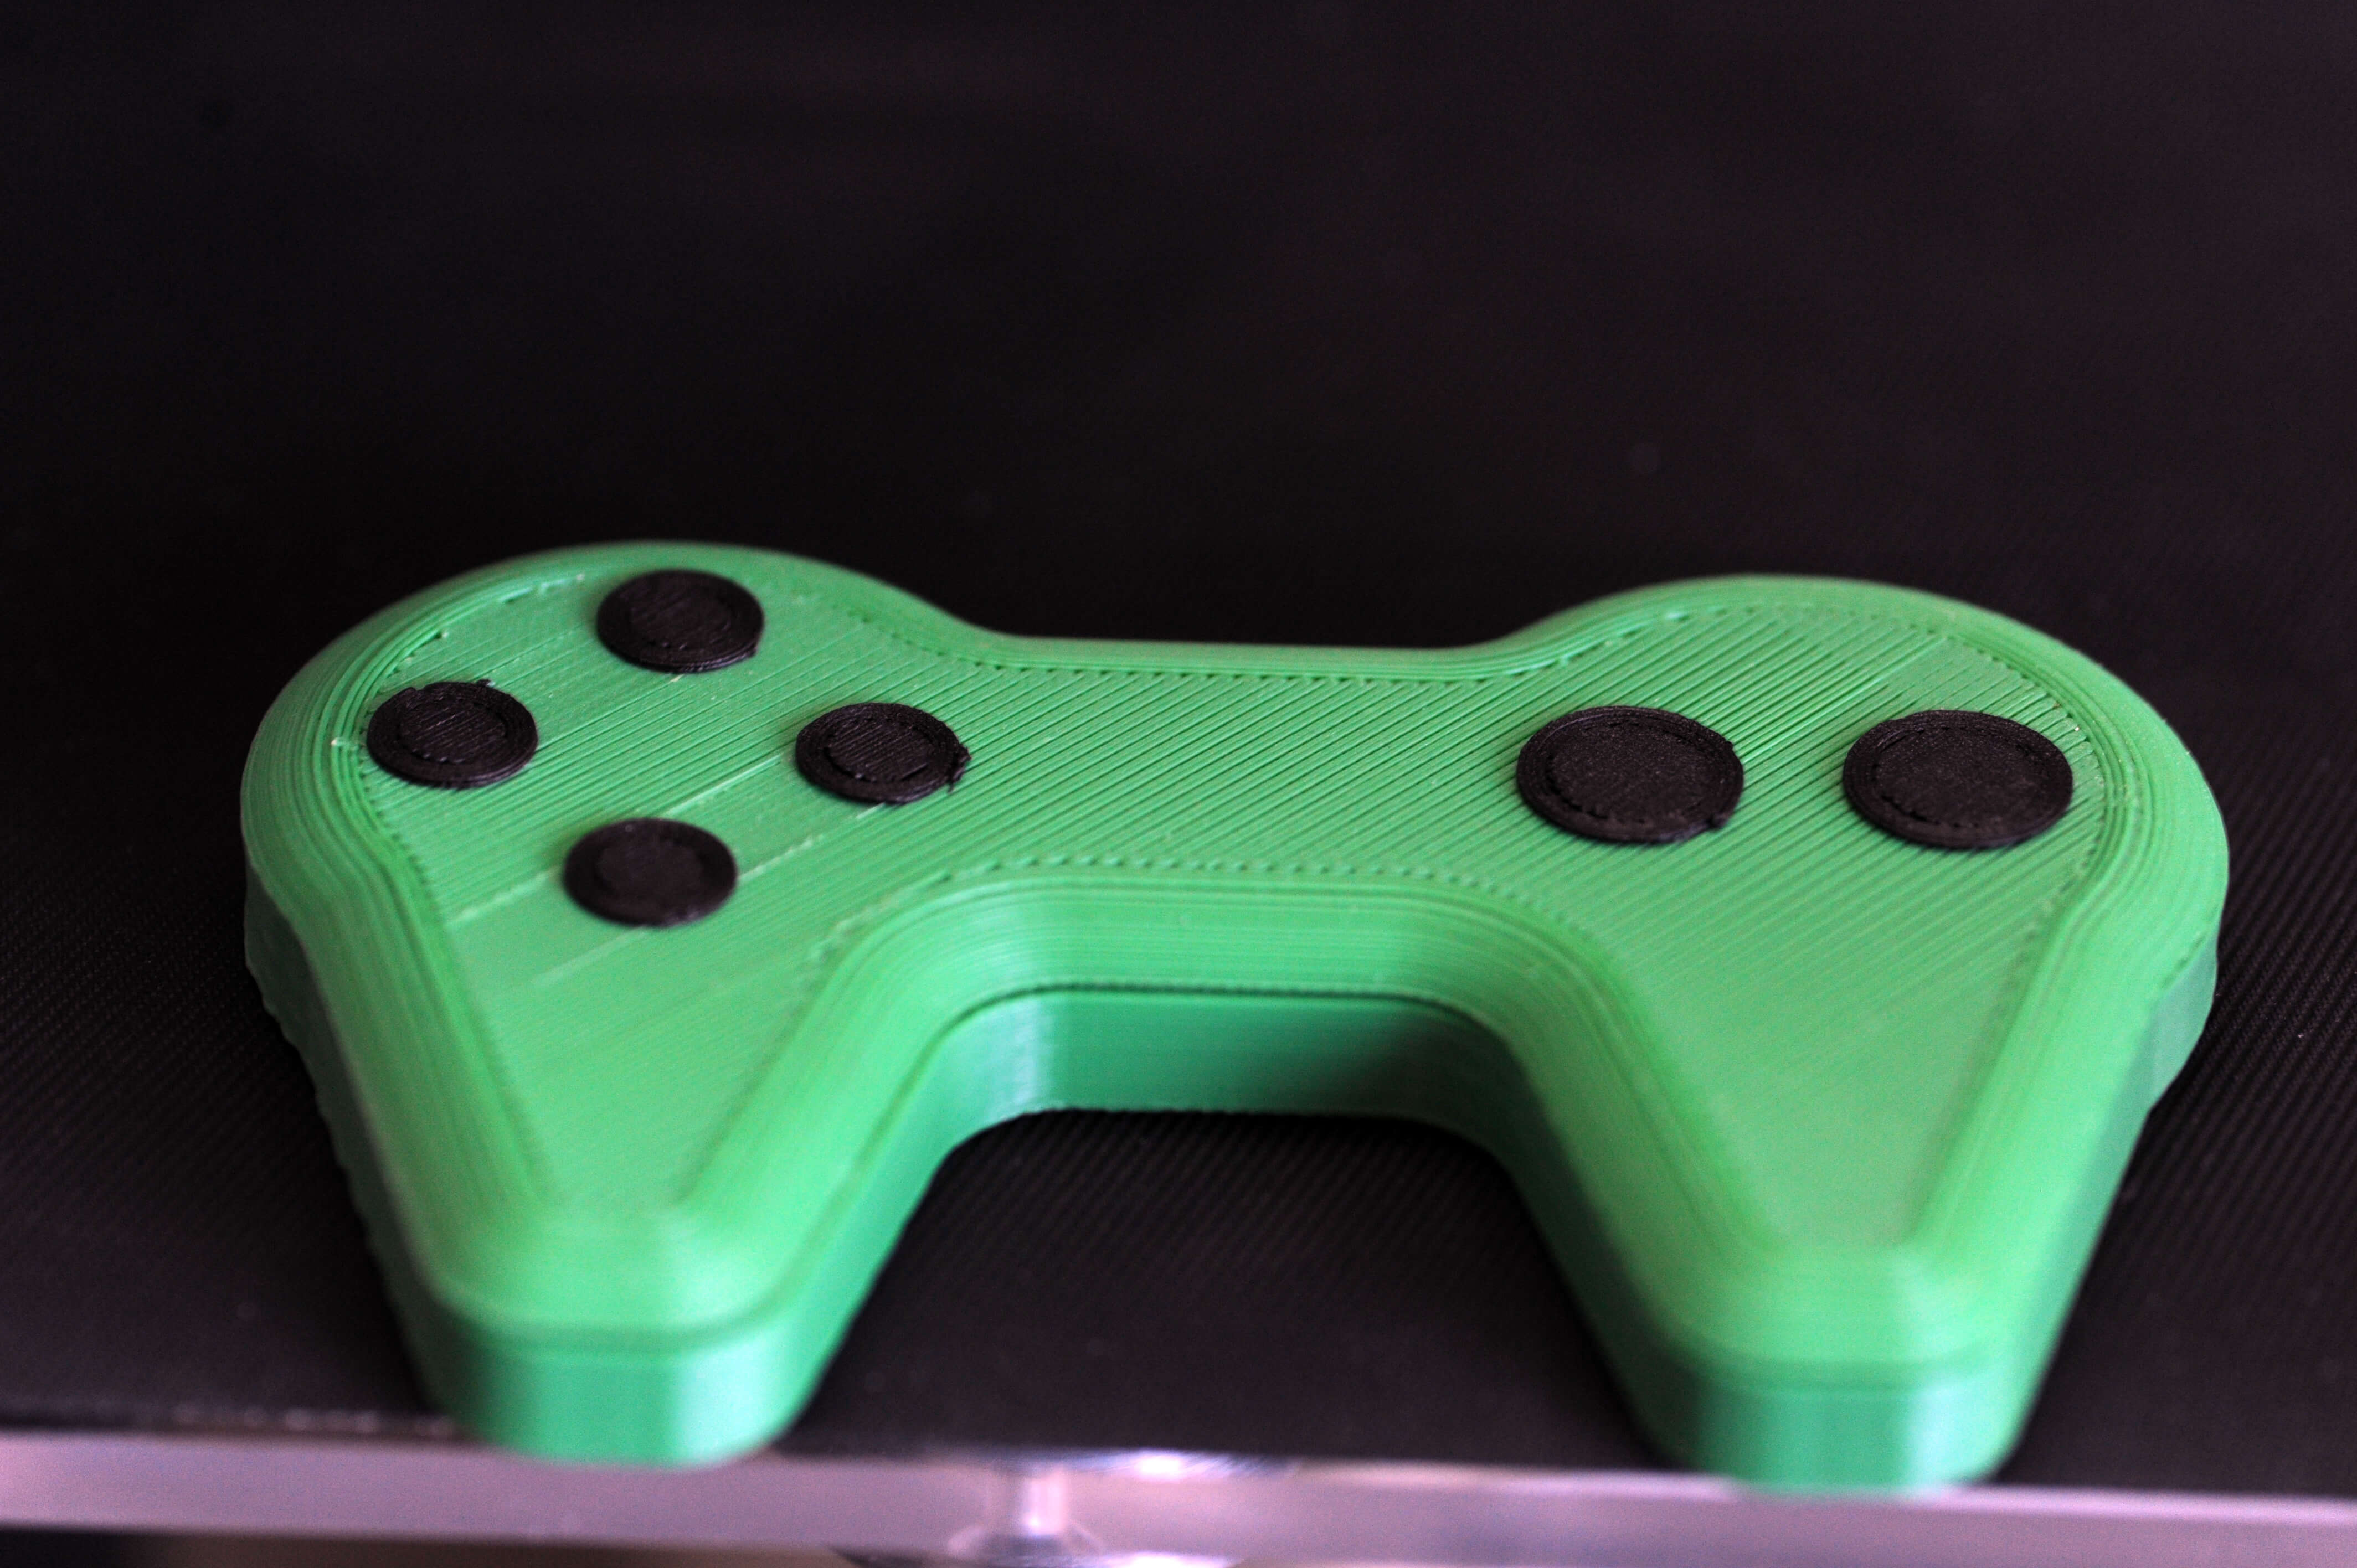 An example of a self-printable computer game controller from the new material